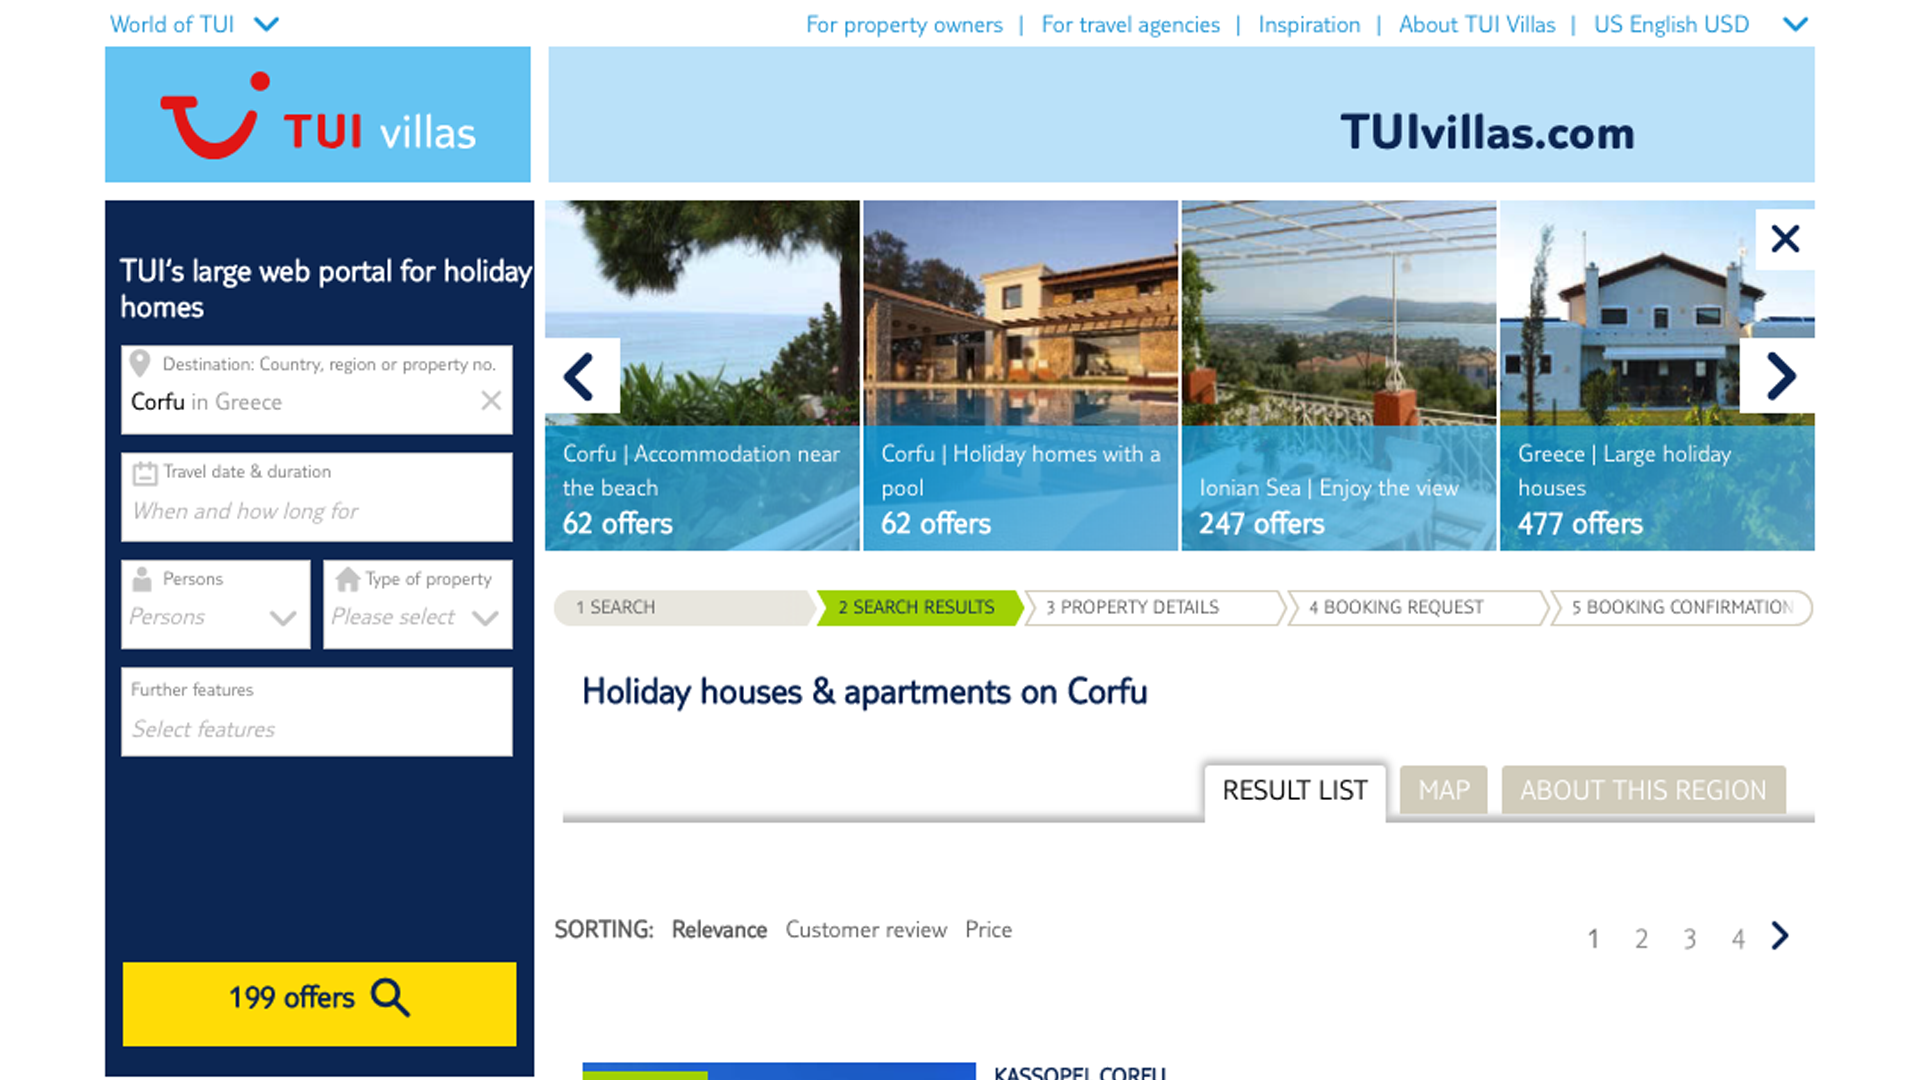 Vacation Rental Channel Manager for TUI Villas Listings